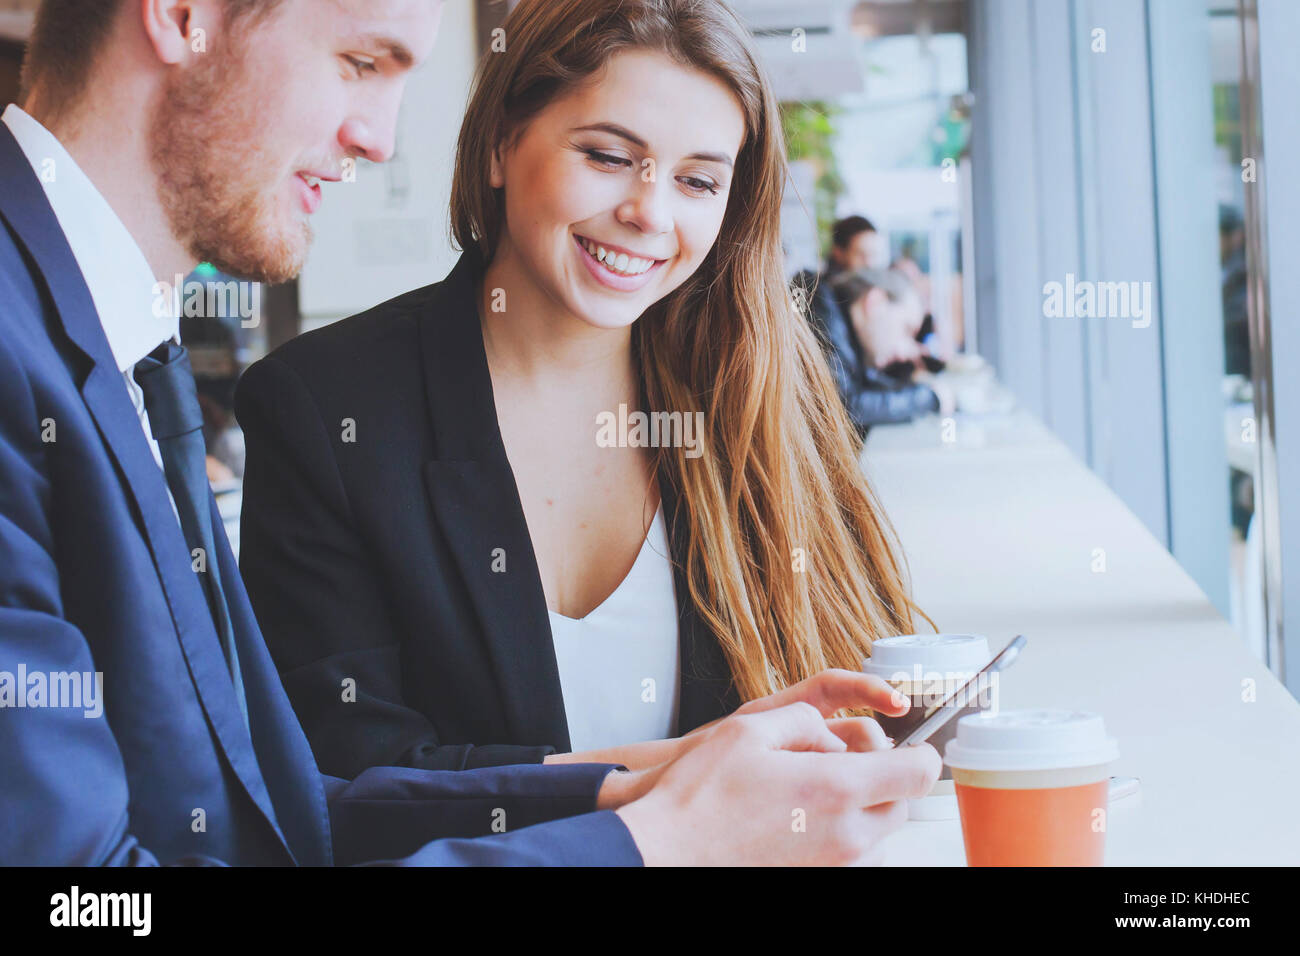 smiling business people using smartphone and drinking coffee Stock Photo